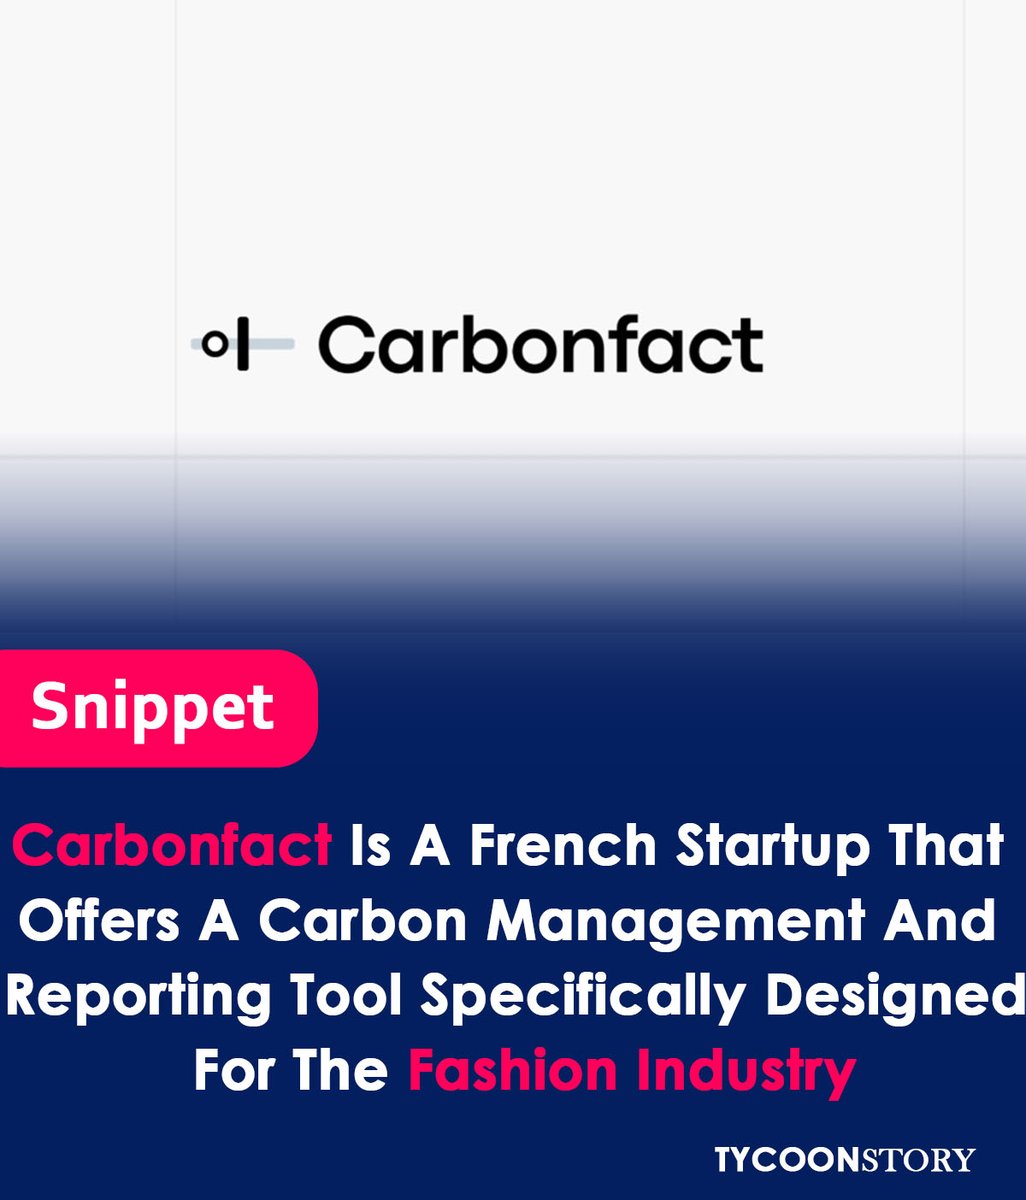 Carbonfact secured $15 million to develop its fashion-focused carbon accounting platform.
#carbonaccounting #sustainability #fashiontech #climatetech #startup #greentech #ecommerce #supplychain #SAAS #carbonfootprint #lifecycleassessment #transparency @carbonfact @martindaniel4